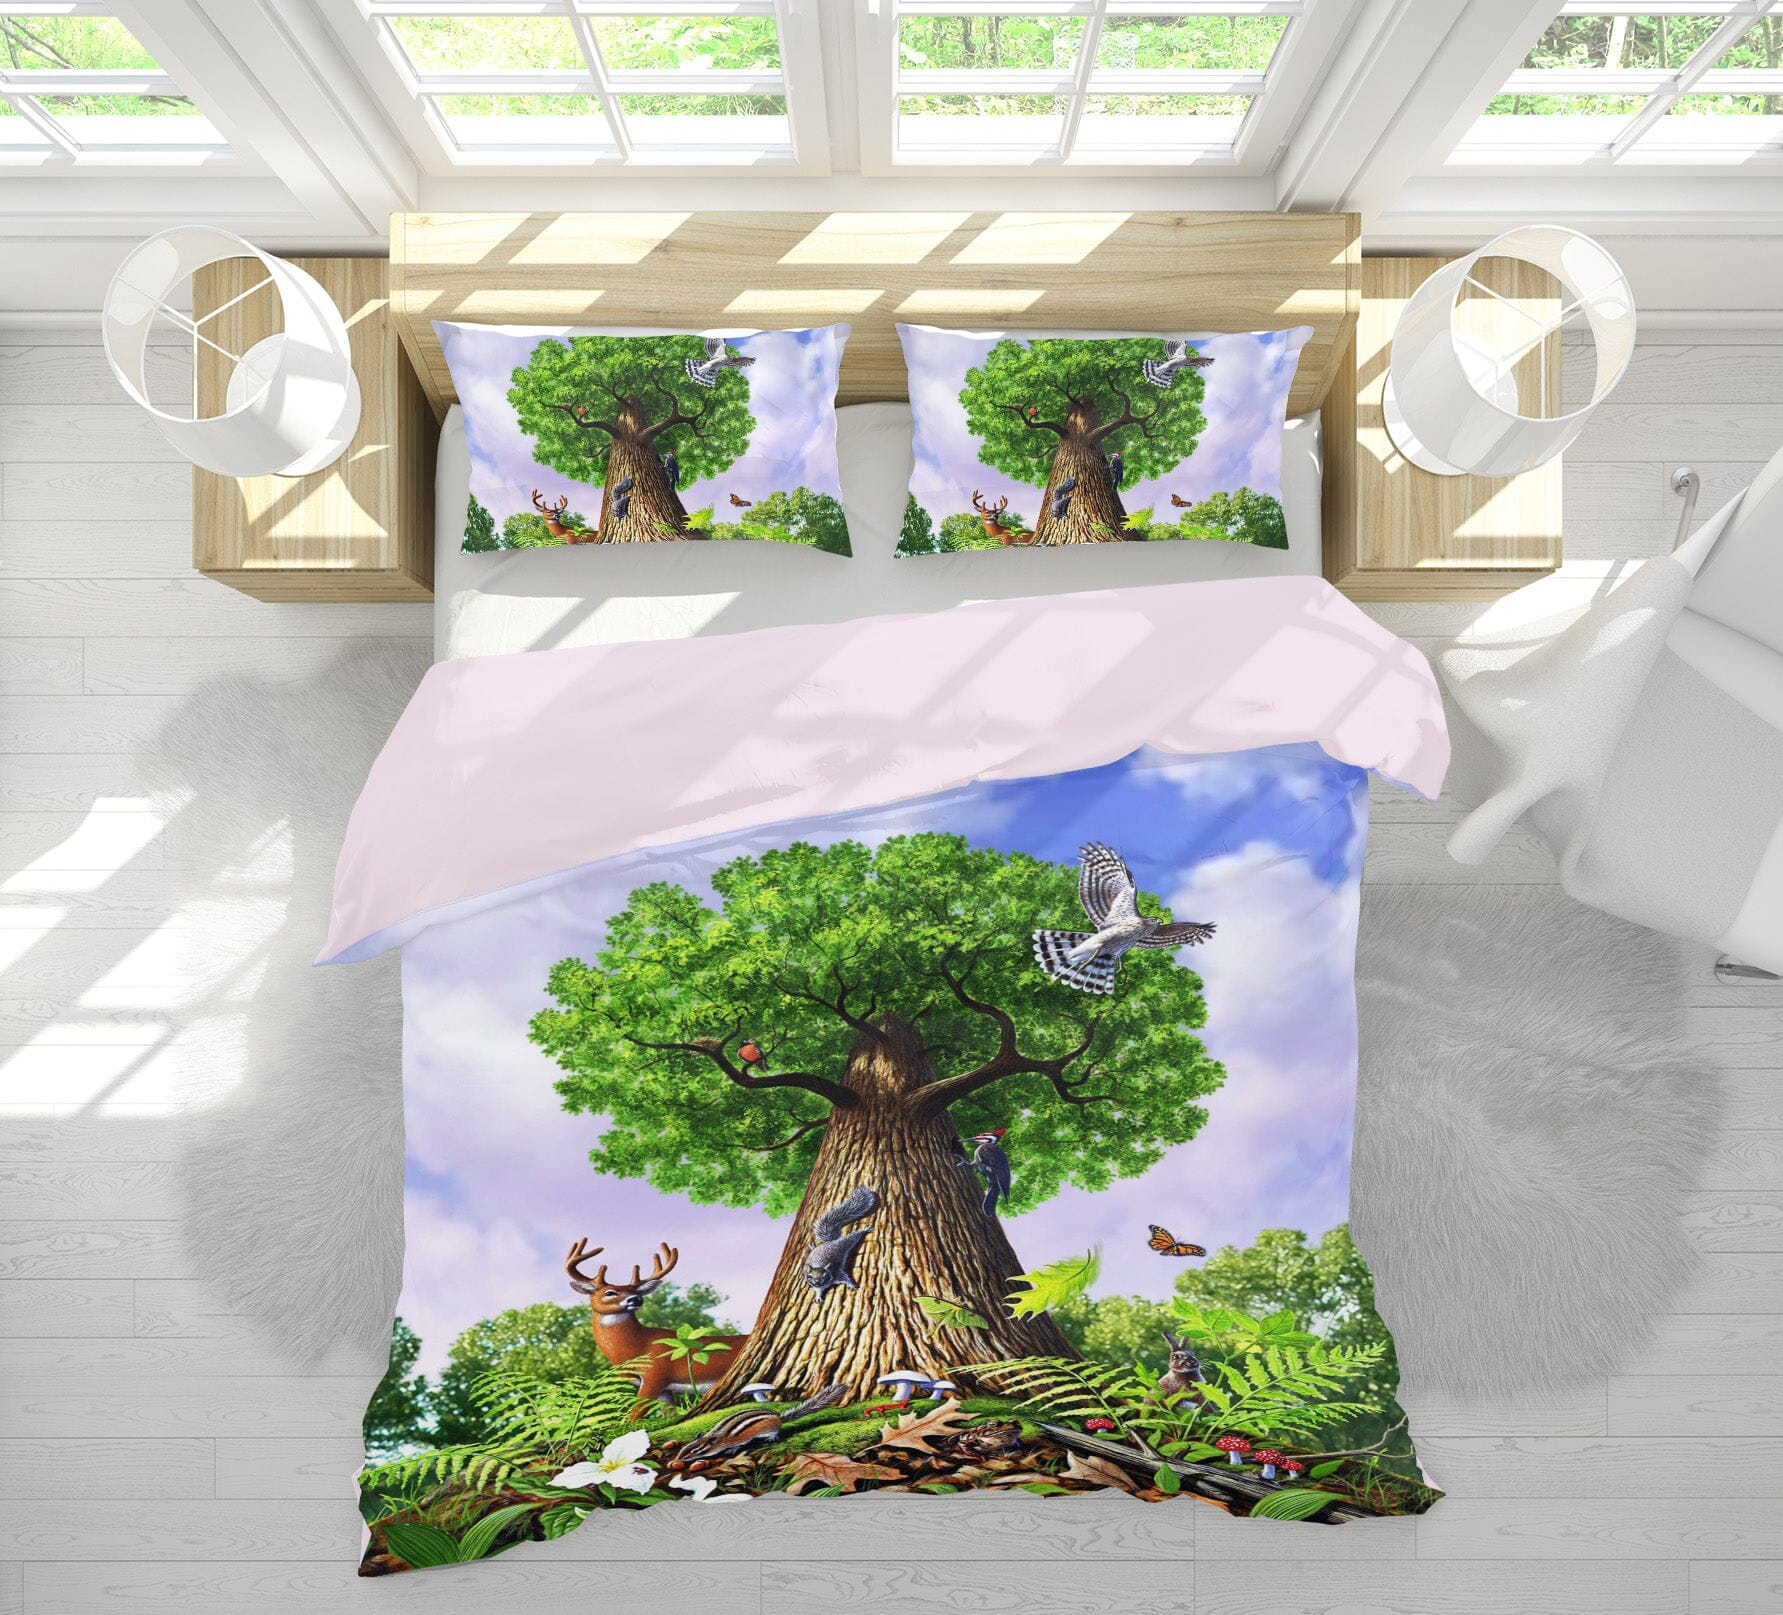 3D Tree Of Life 2134 Jerry LoFaro bedding Bed Pillowcases Quilt Quiet Covers AJ Creativity Home 